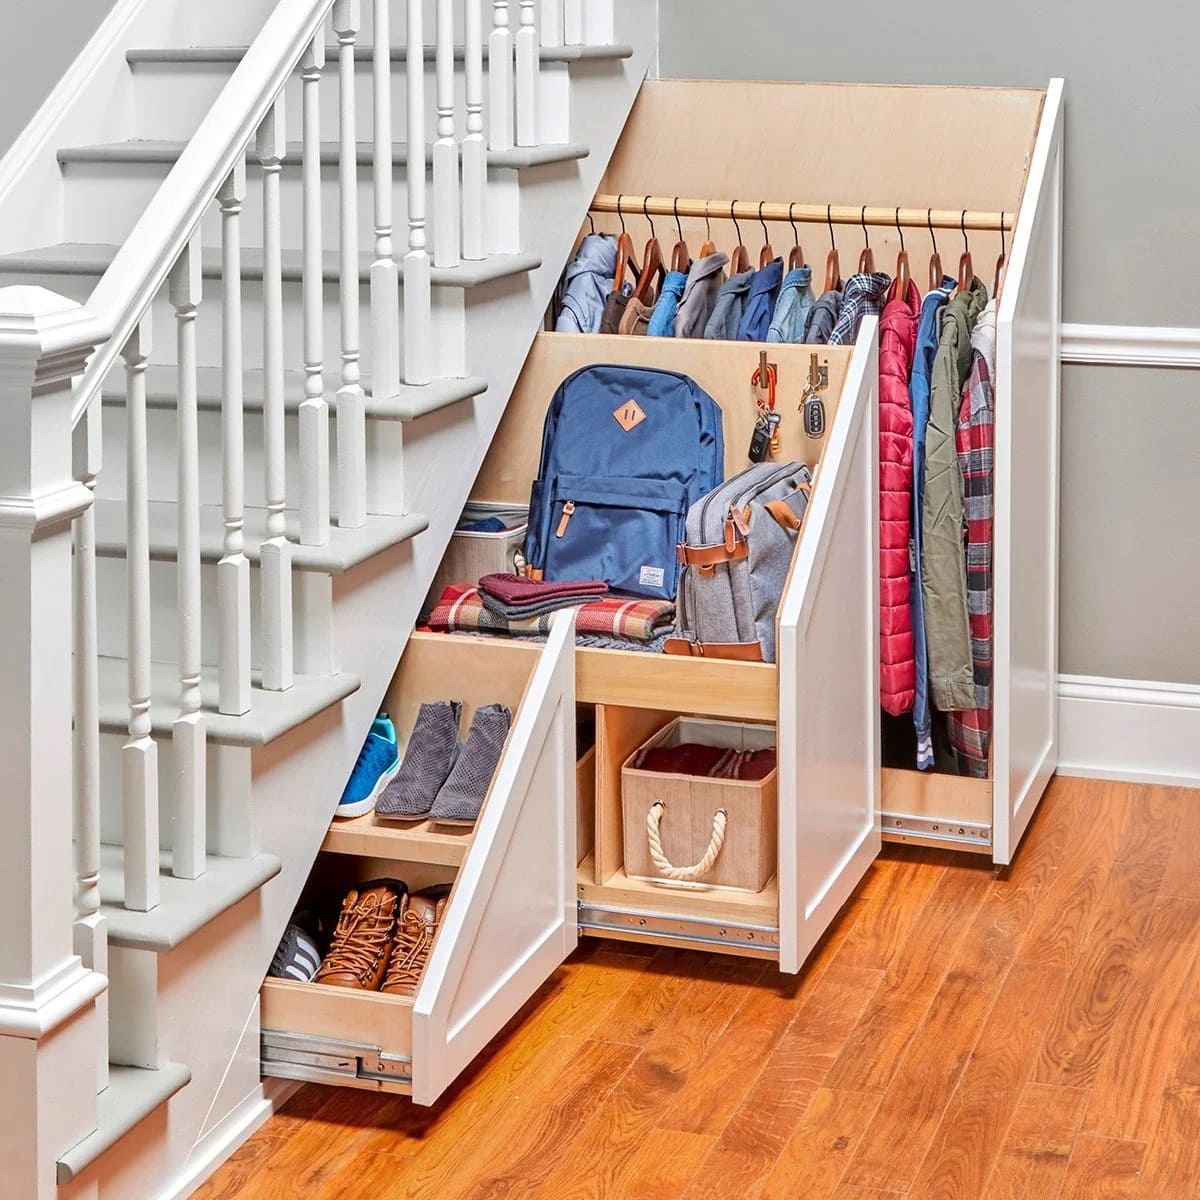 How To Build Storage Under Stairs | Storables